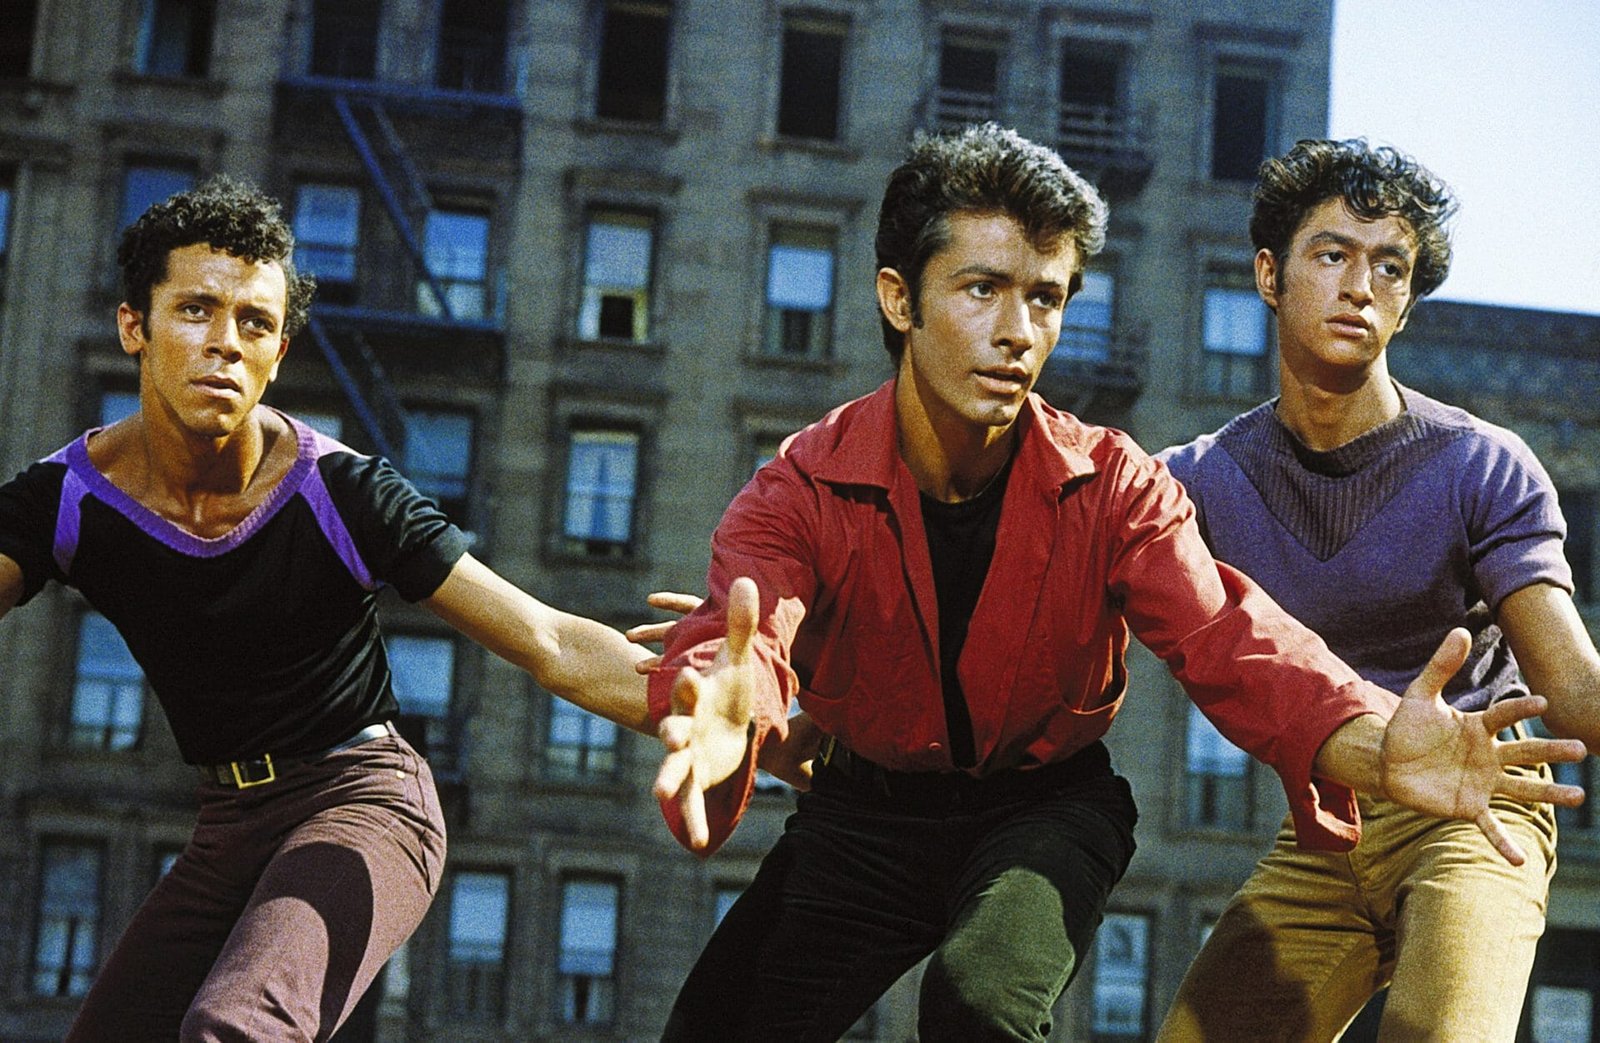 Best Romance On HBO Max: West Side Story (1961)